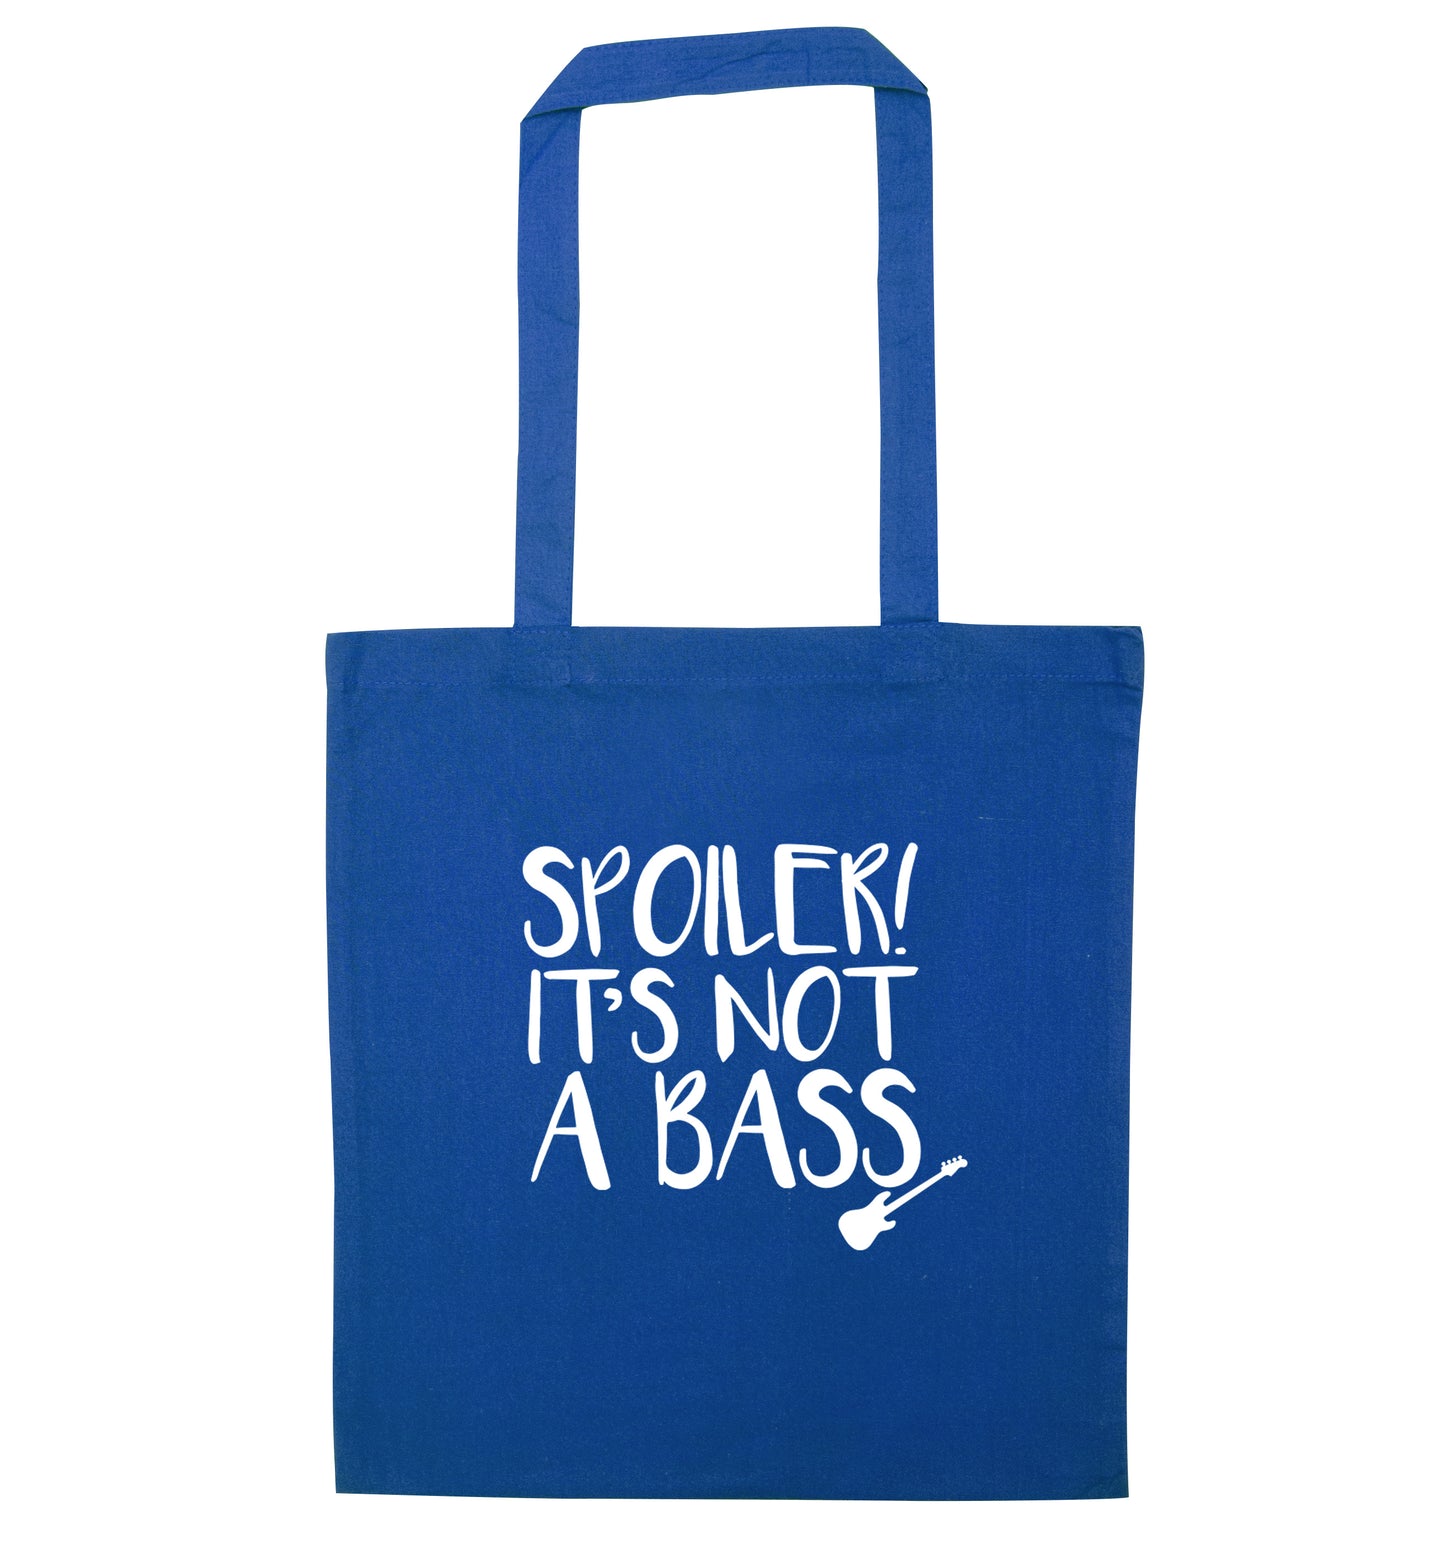 Spoiler it's not a bass blue tote bag